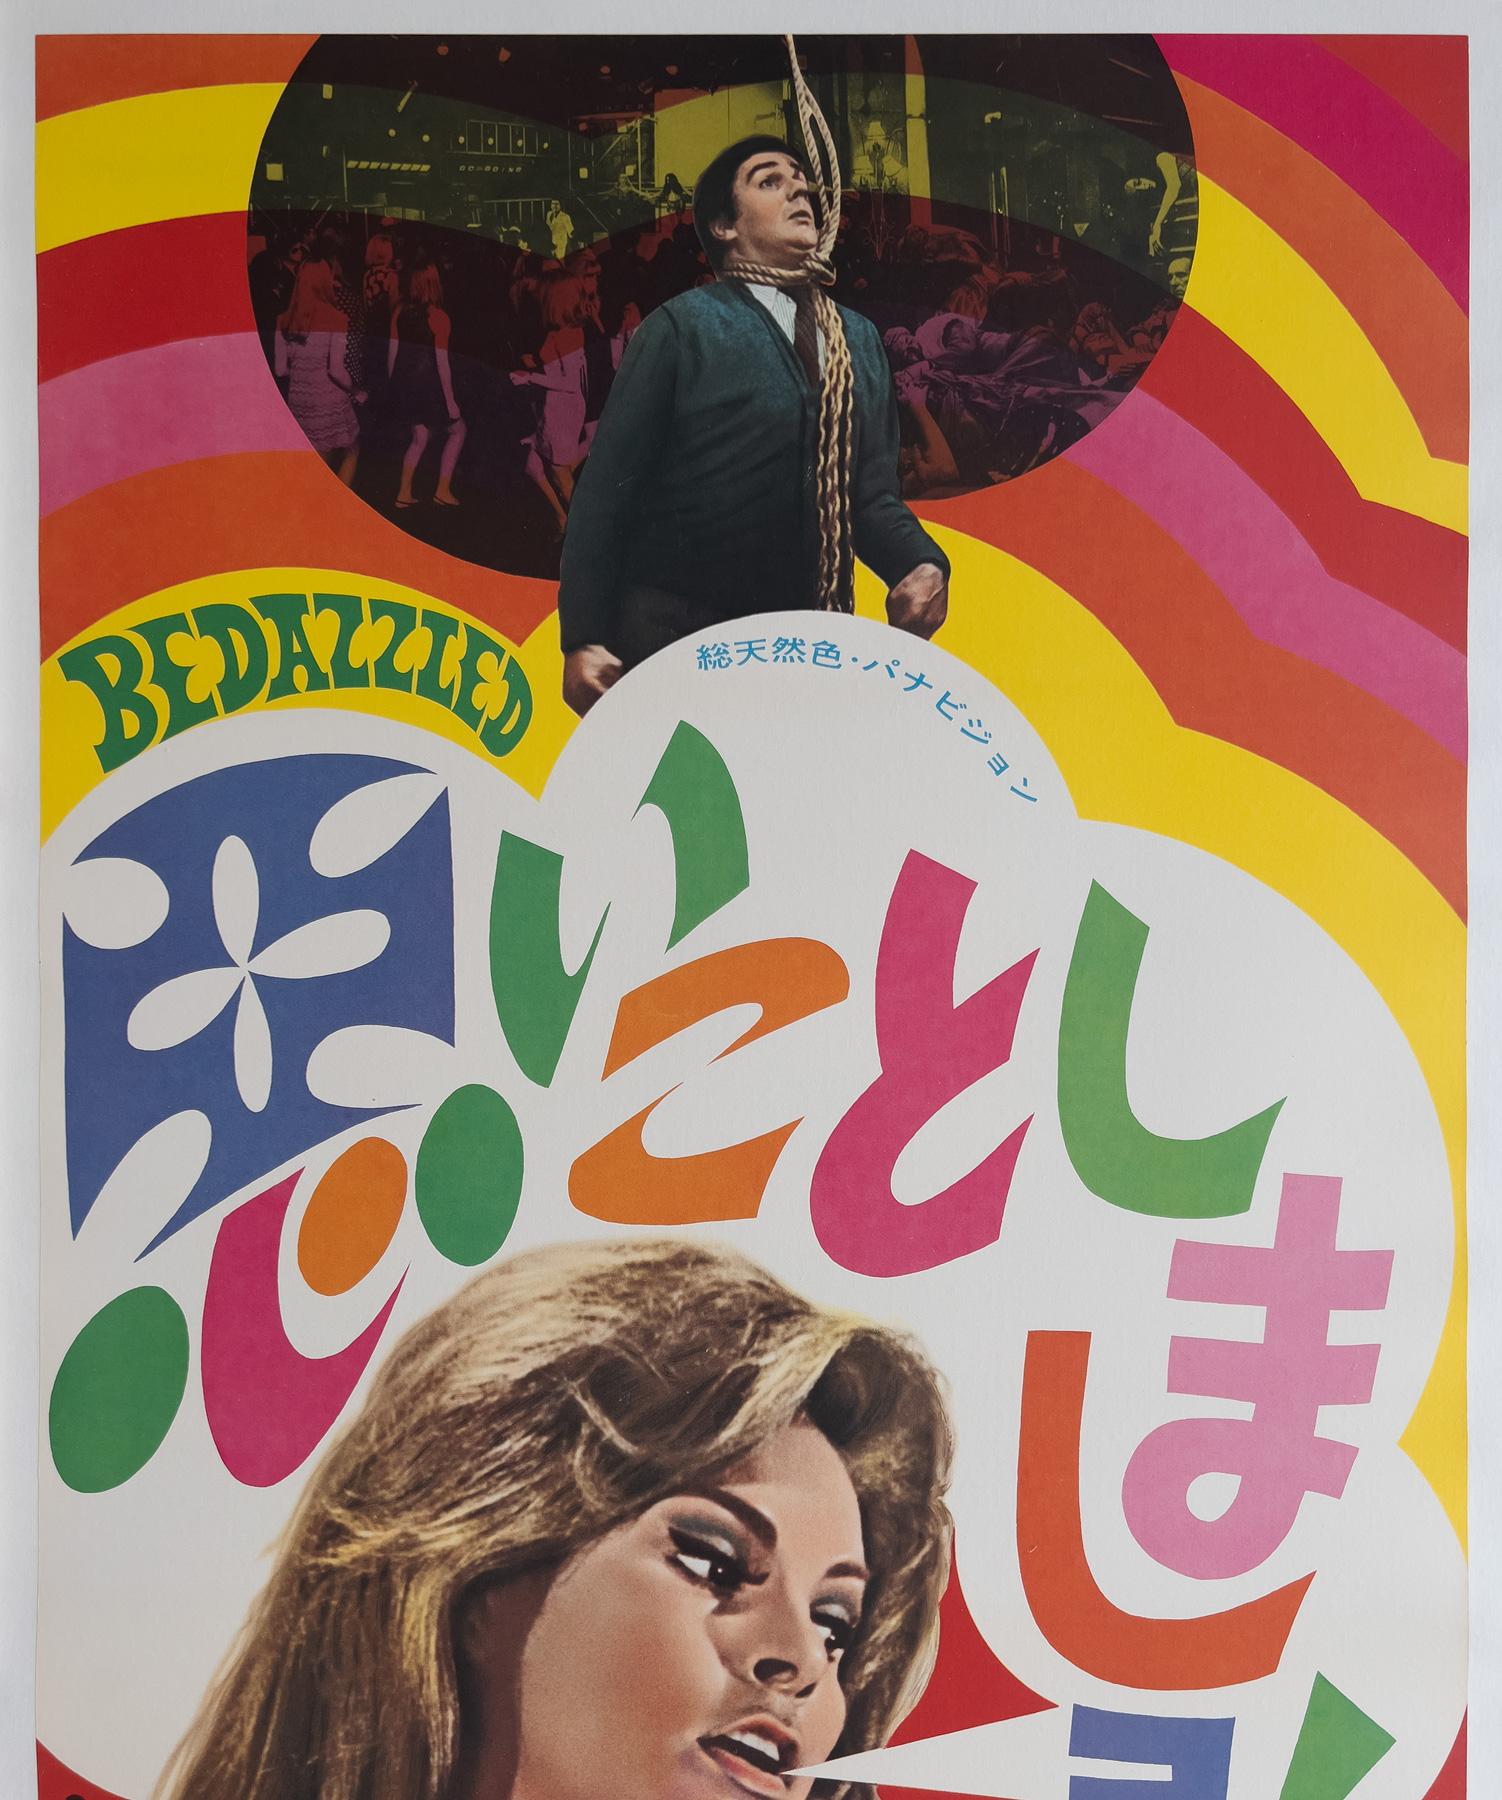 Bedazzled 1968 Original Japanese Tatekan 2 Sheet Film Poster In Excellent Condition For Sale In Bath, Somerset